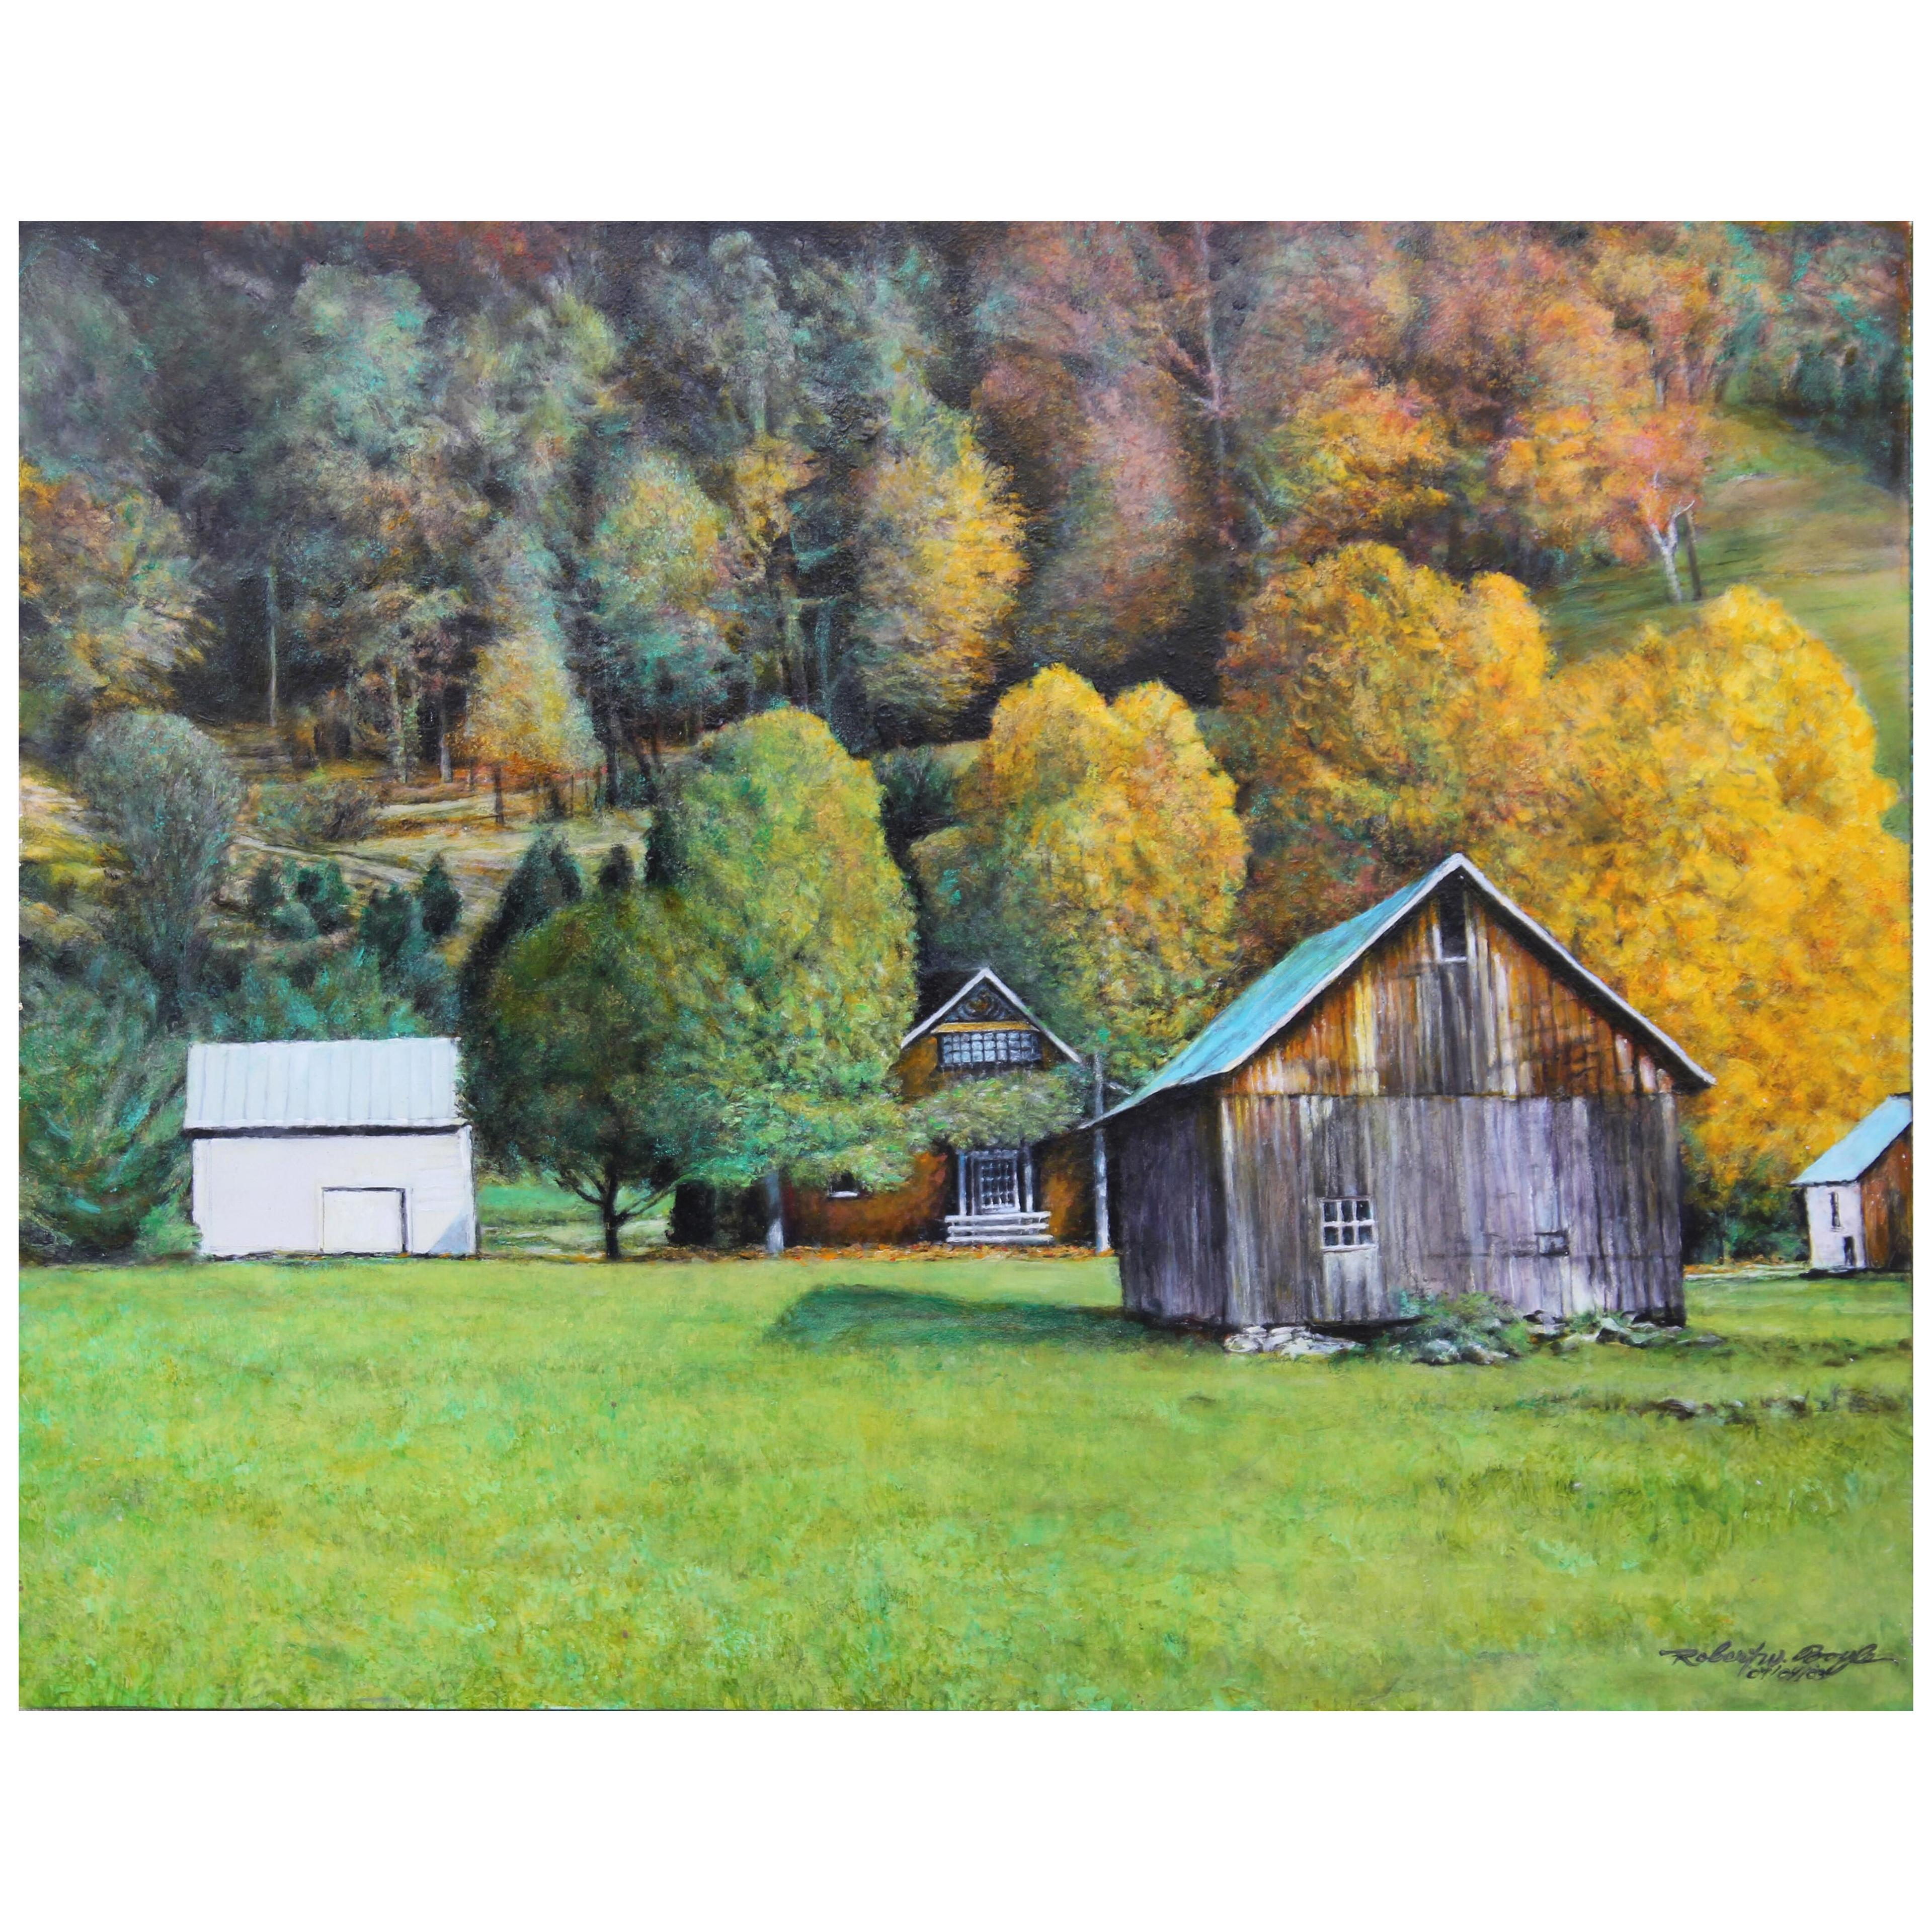 2000s Impressionist Autumn Naturalistic Landscape with a Cabin Oil on Canvas